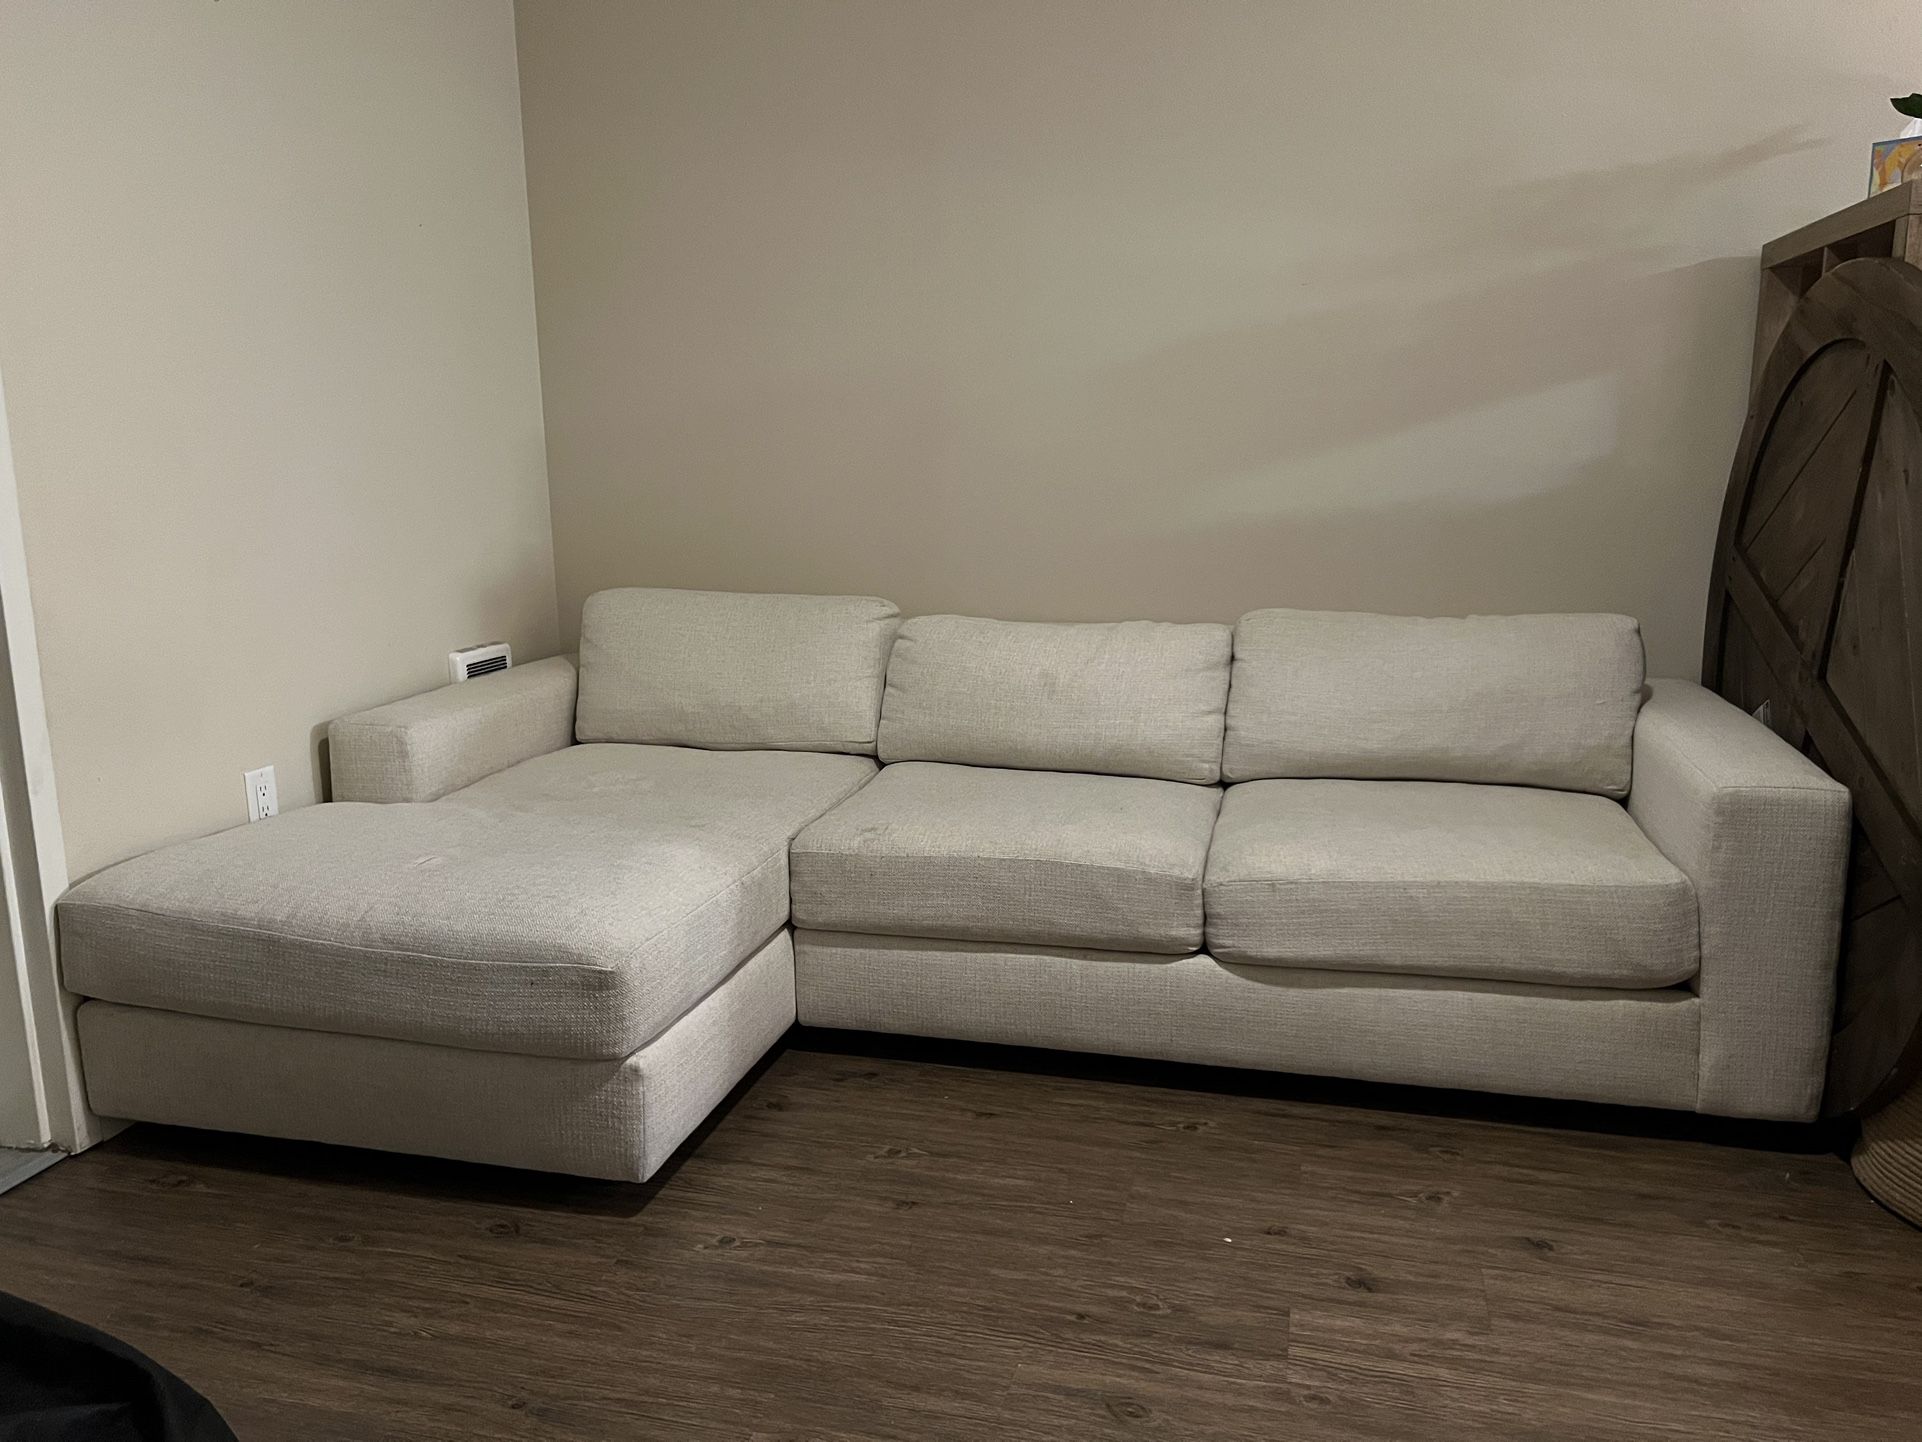 West Elm Urban Two Piece Chaise Sectional